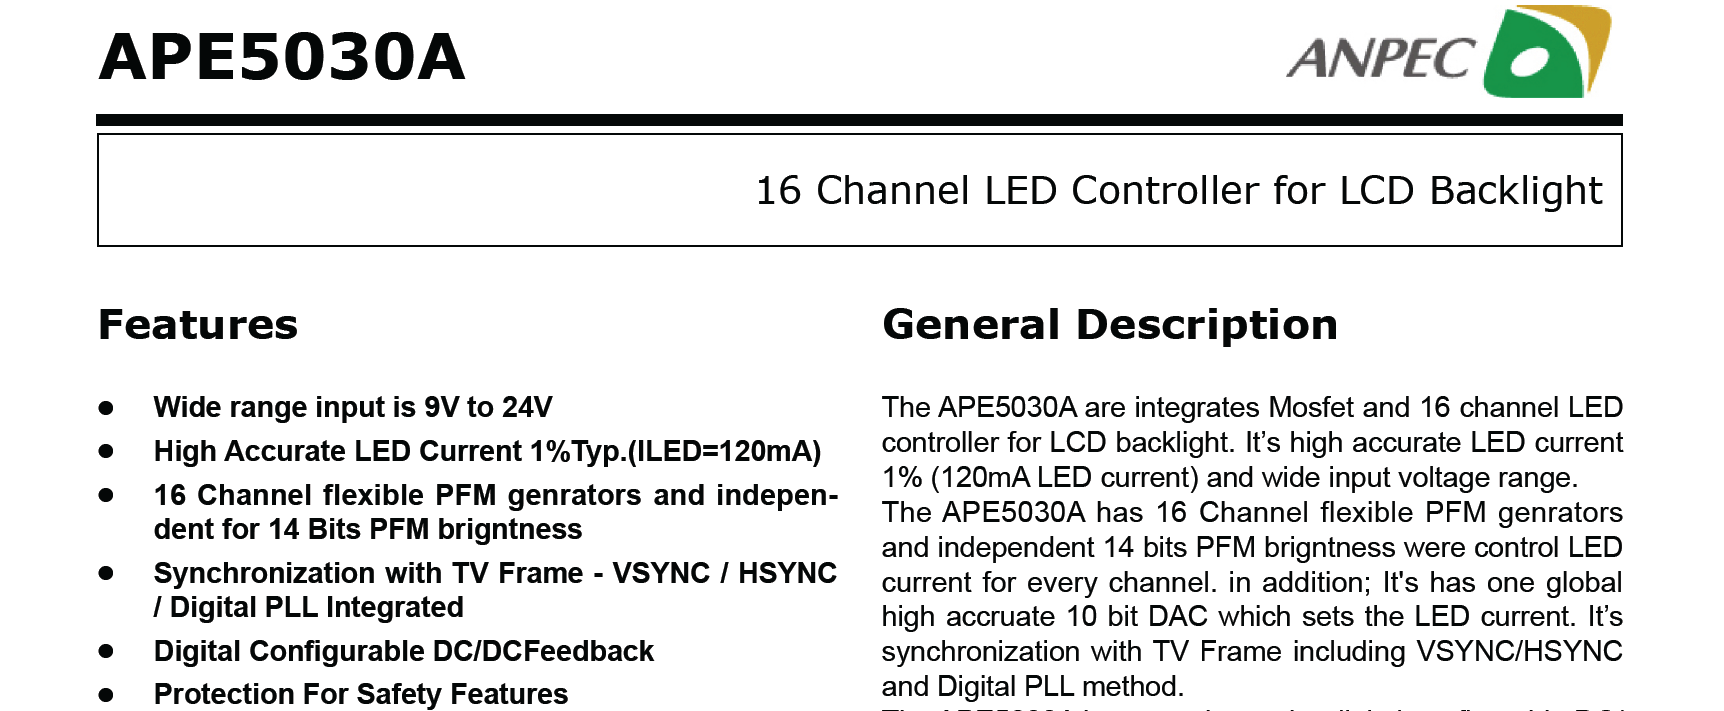 16 Channel LED Controller